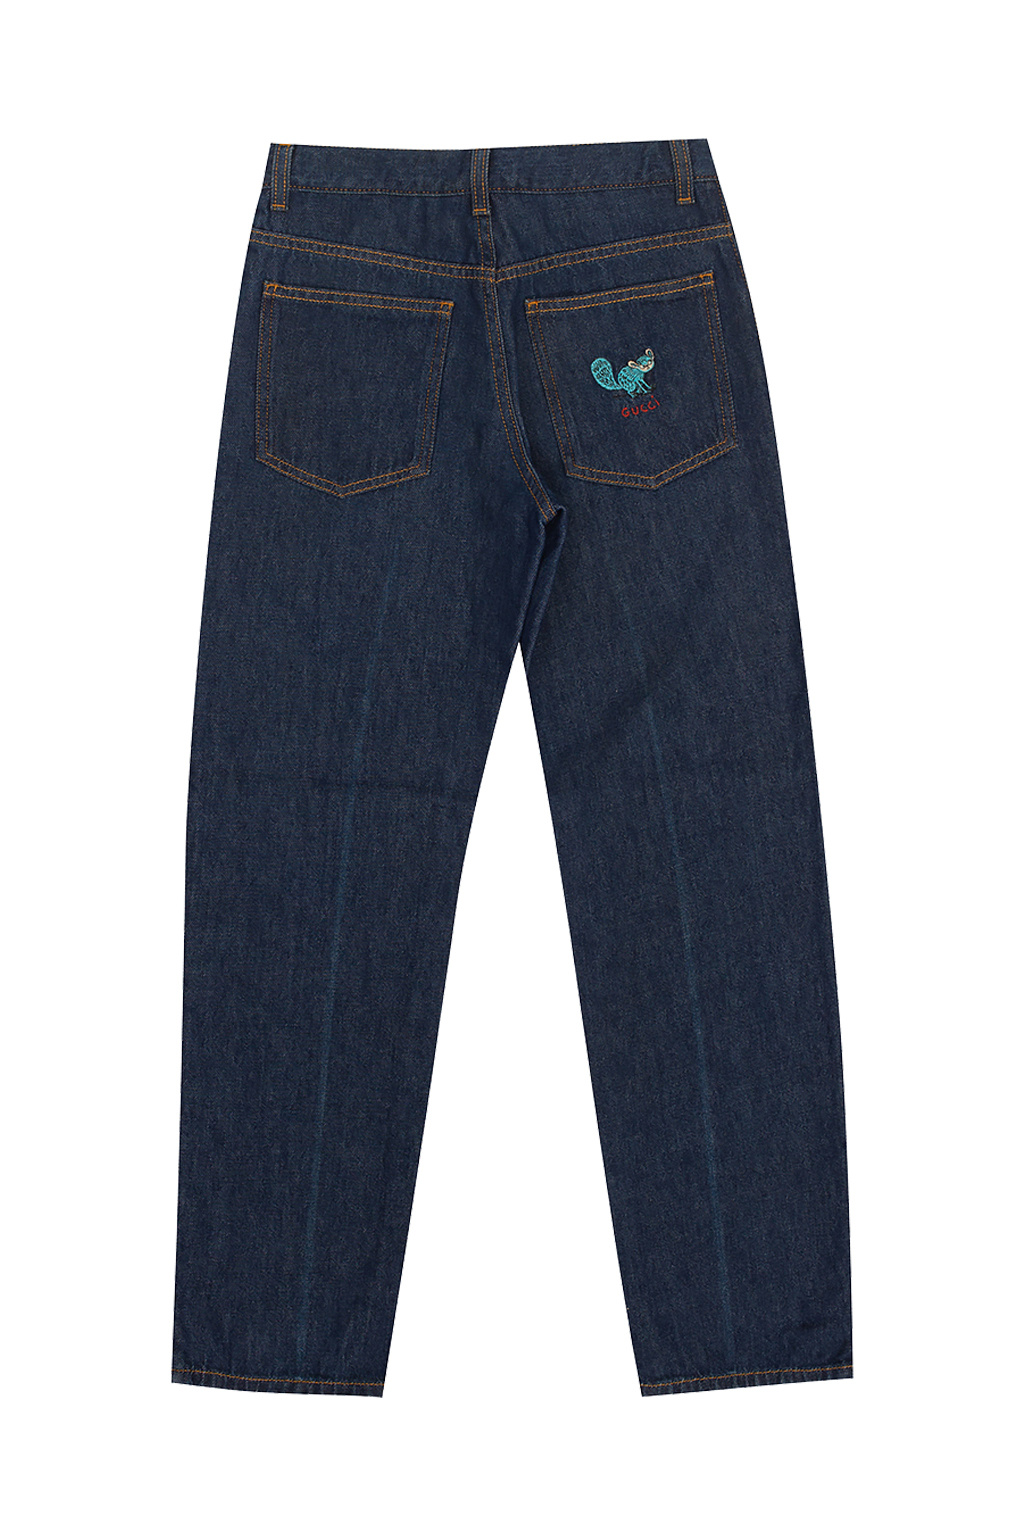 Gucci Kids Jeans with logo